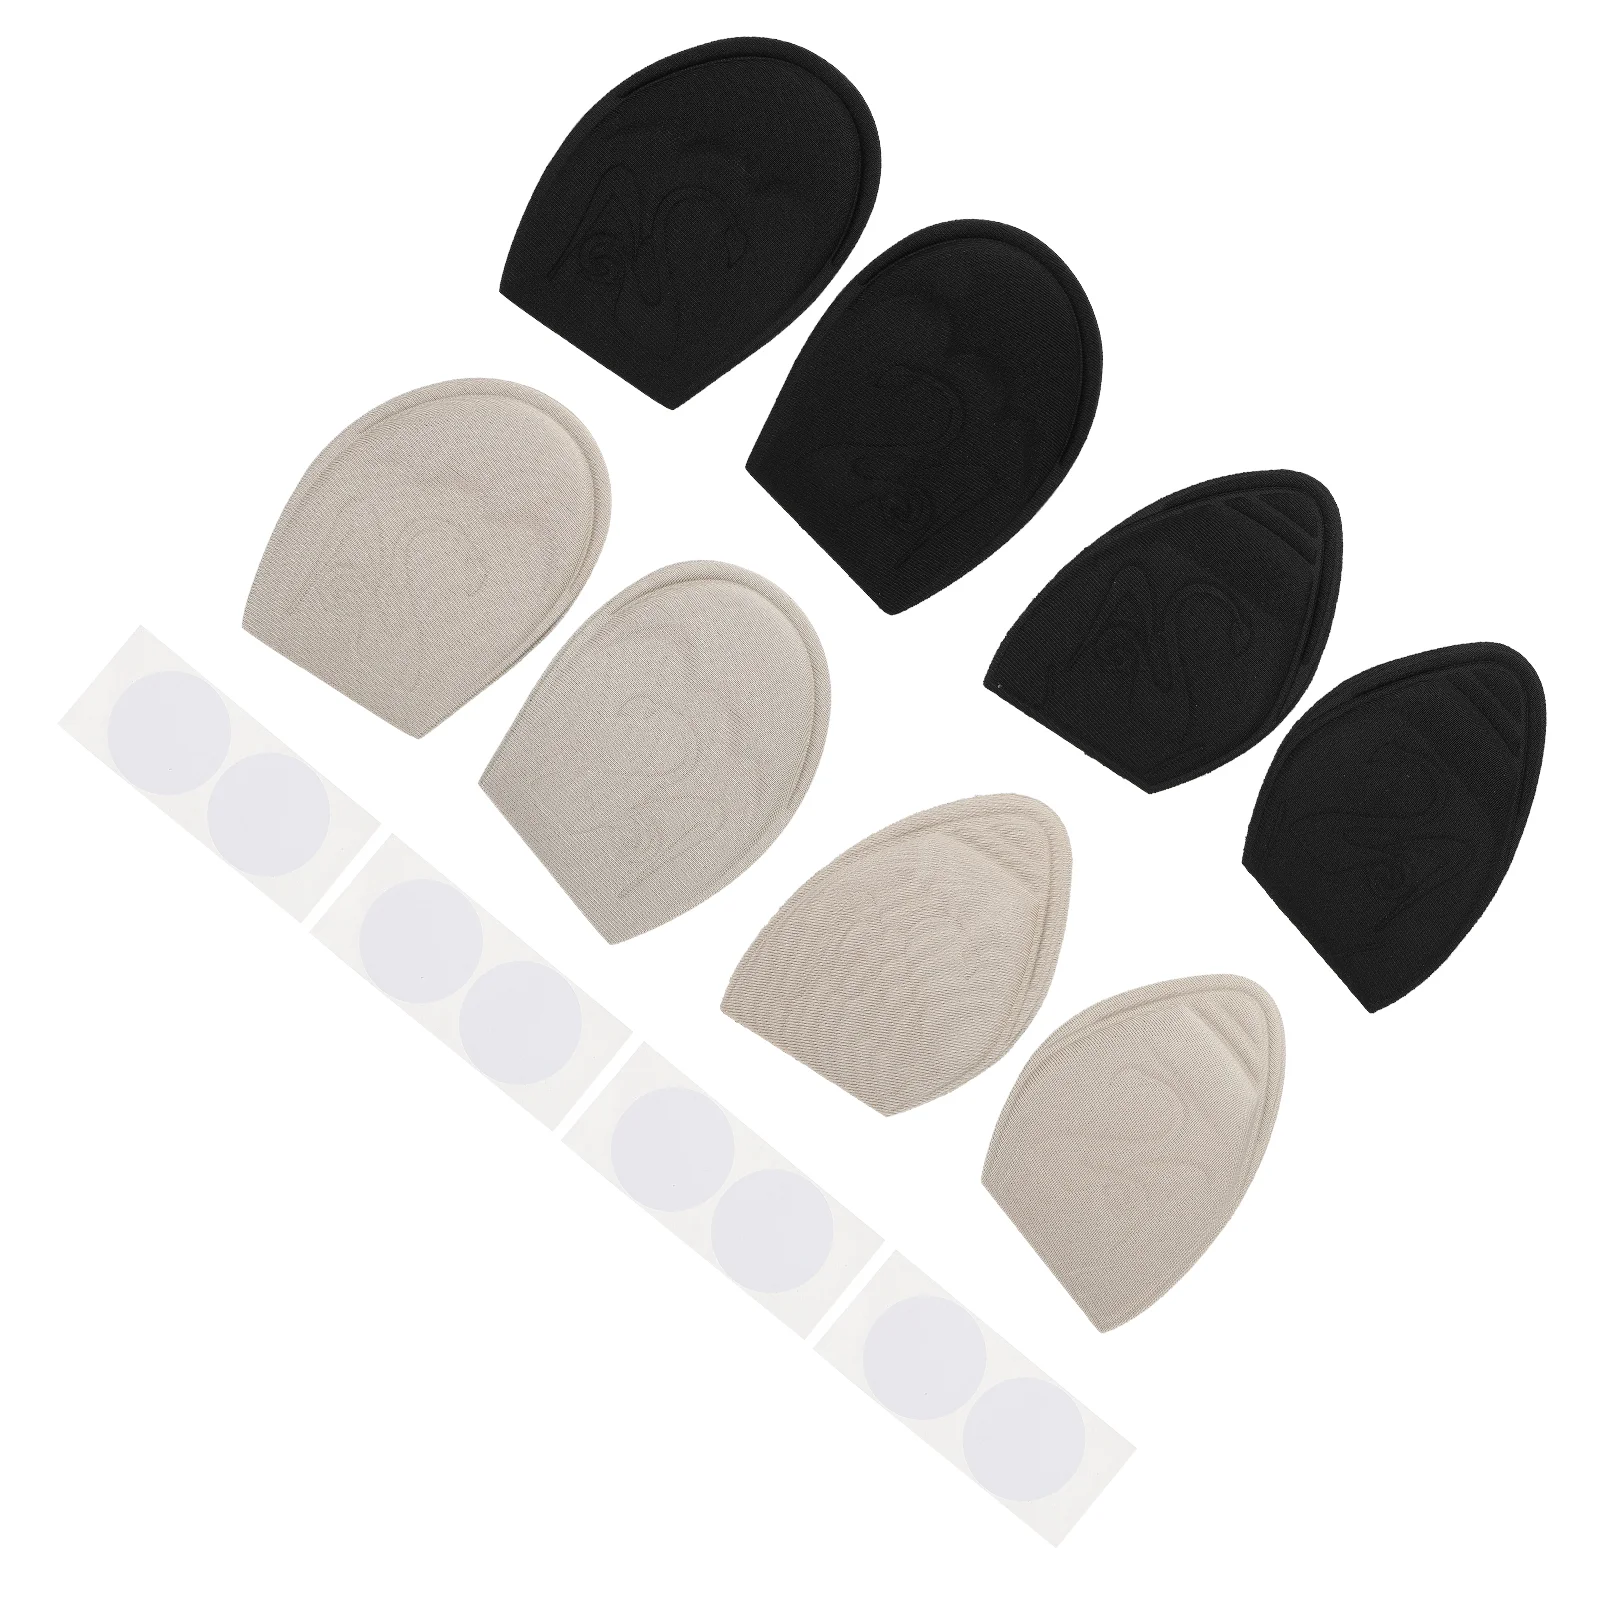 

Heel High Pads Grips Forefoot Shoe Anti Grip Insoles Liners Inserts Sole Metatarsal Noise Reduction Cushion Cushions